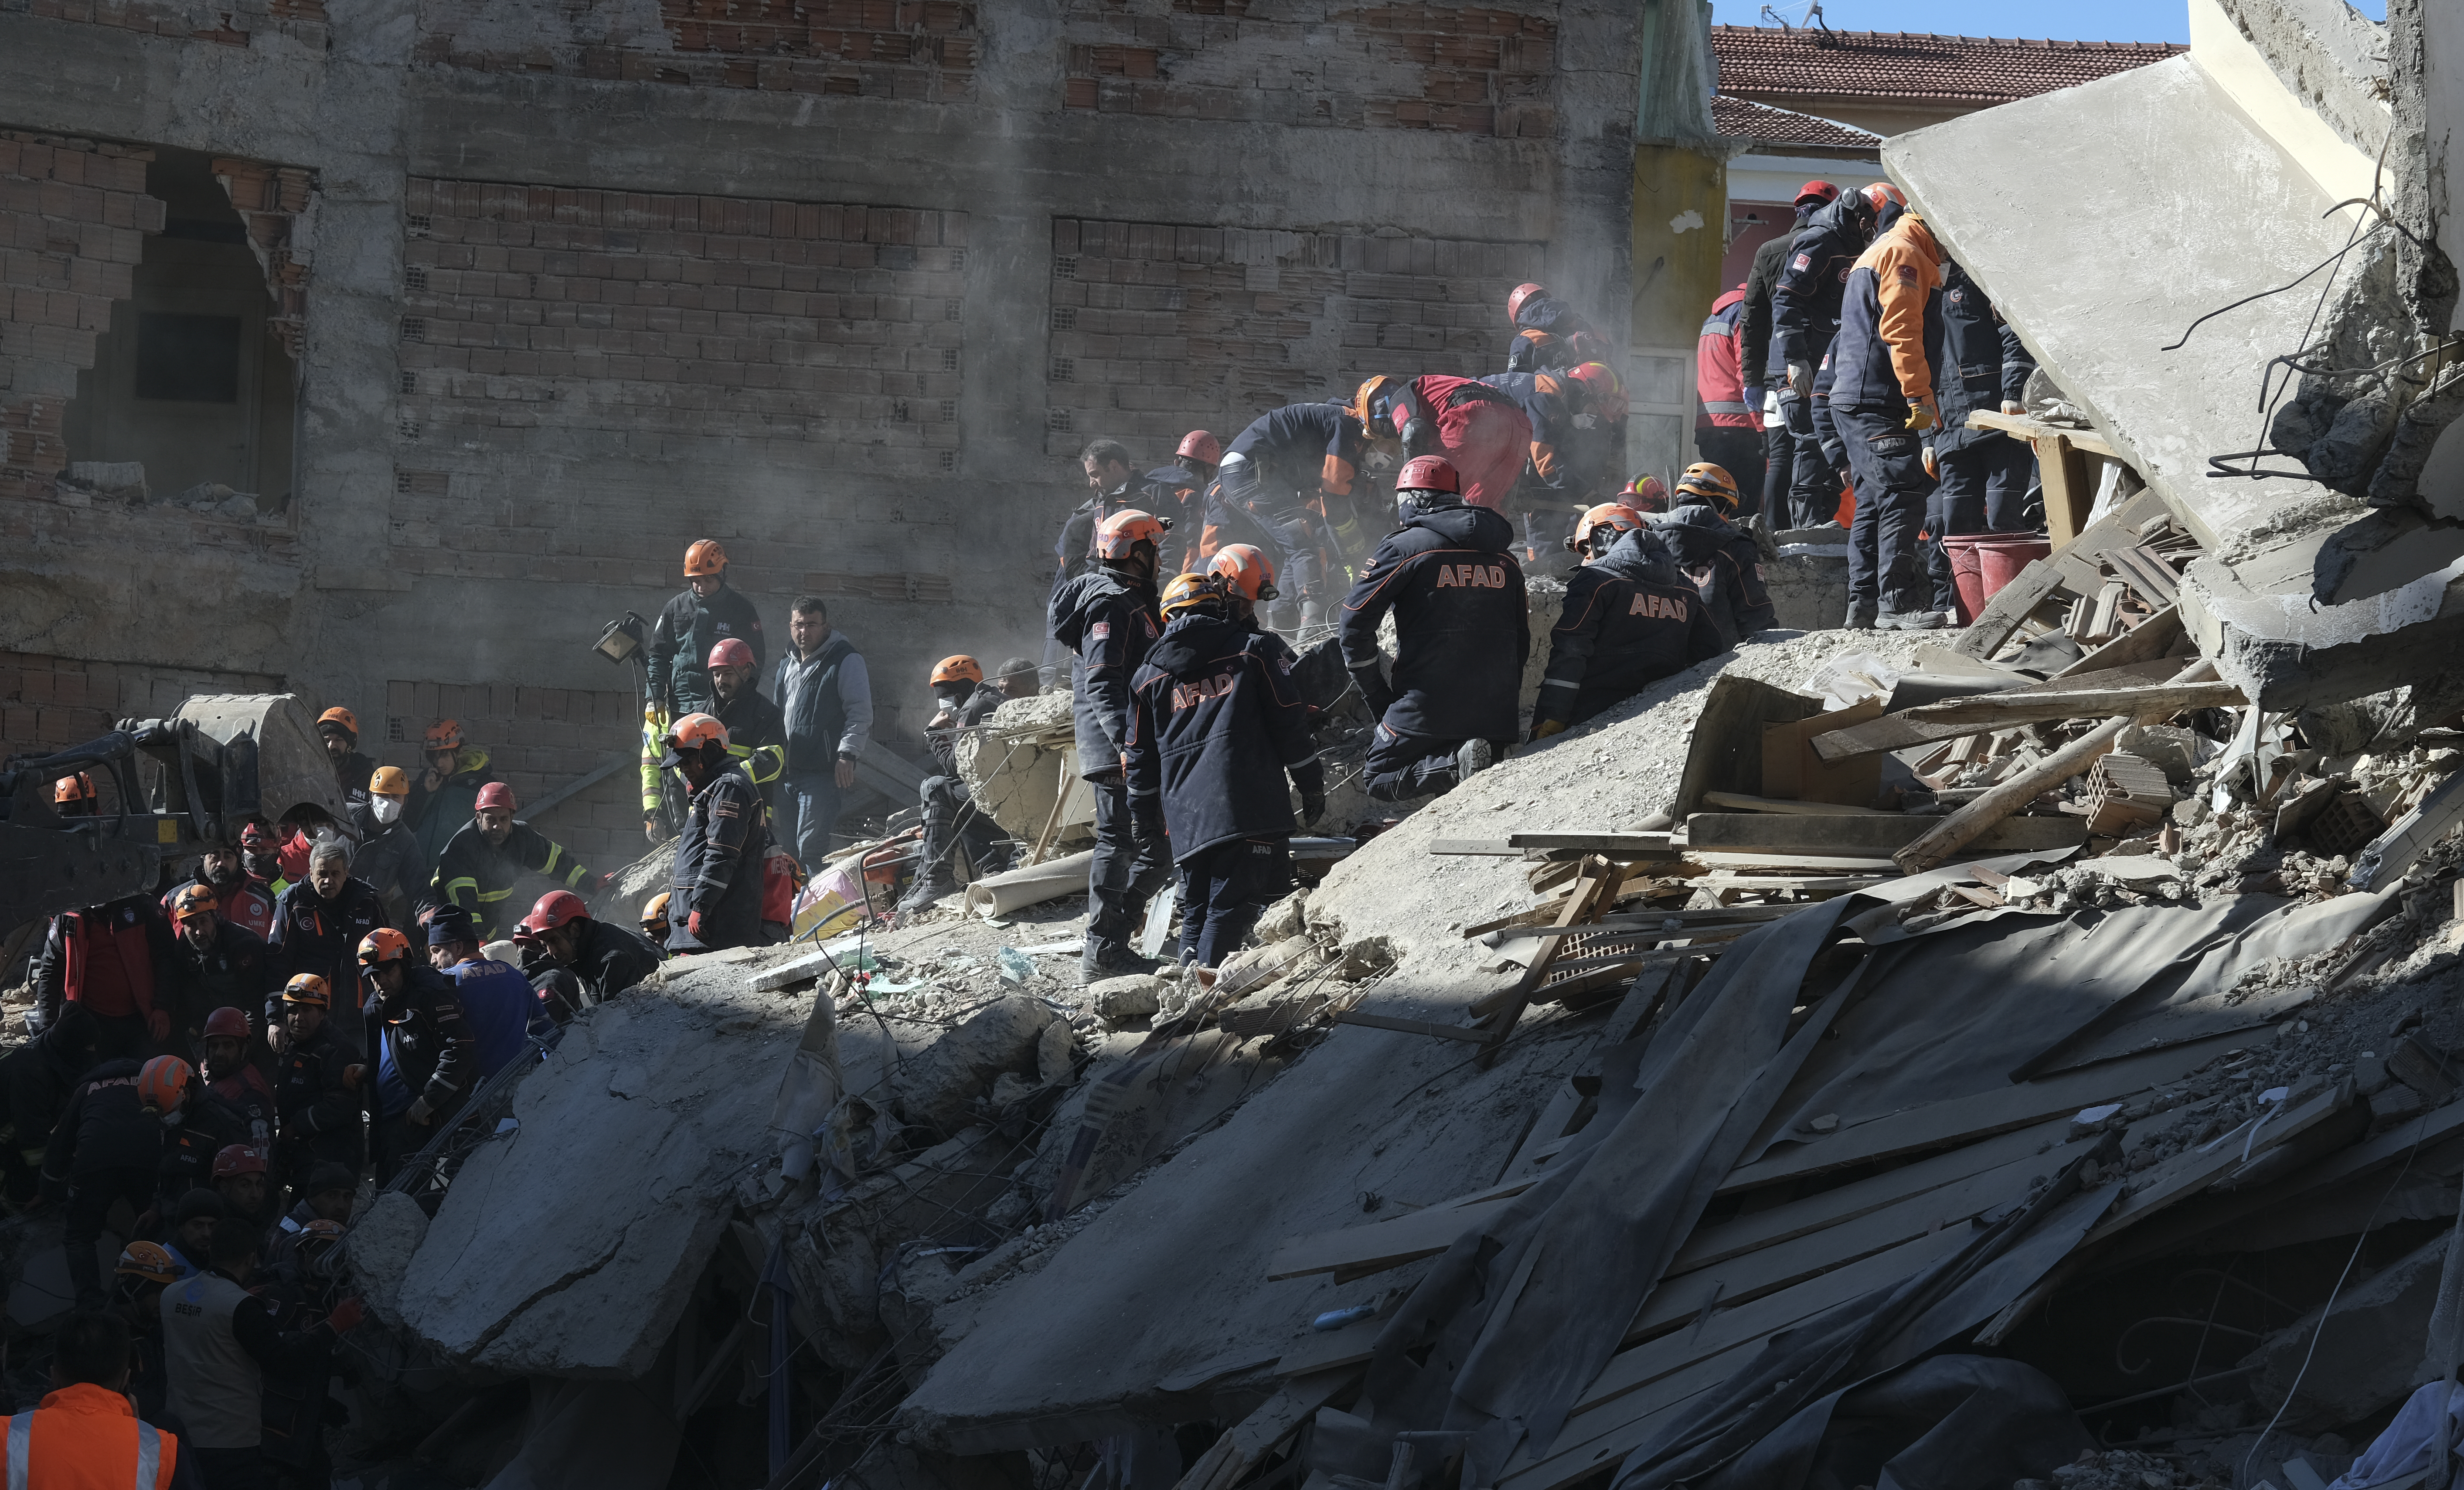 Rescuers work on searching for people buried under the rubble on a collapsed building, after an earthquake struck Elazig, eastern Turkey, on January 25, 2020